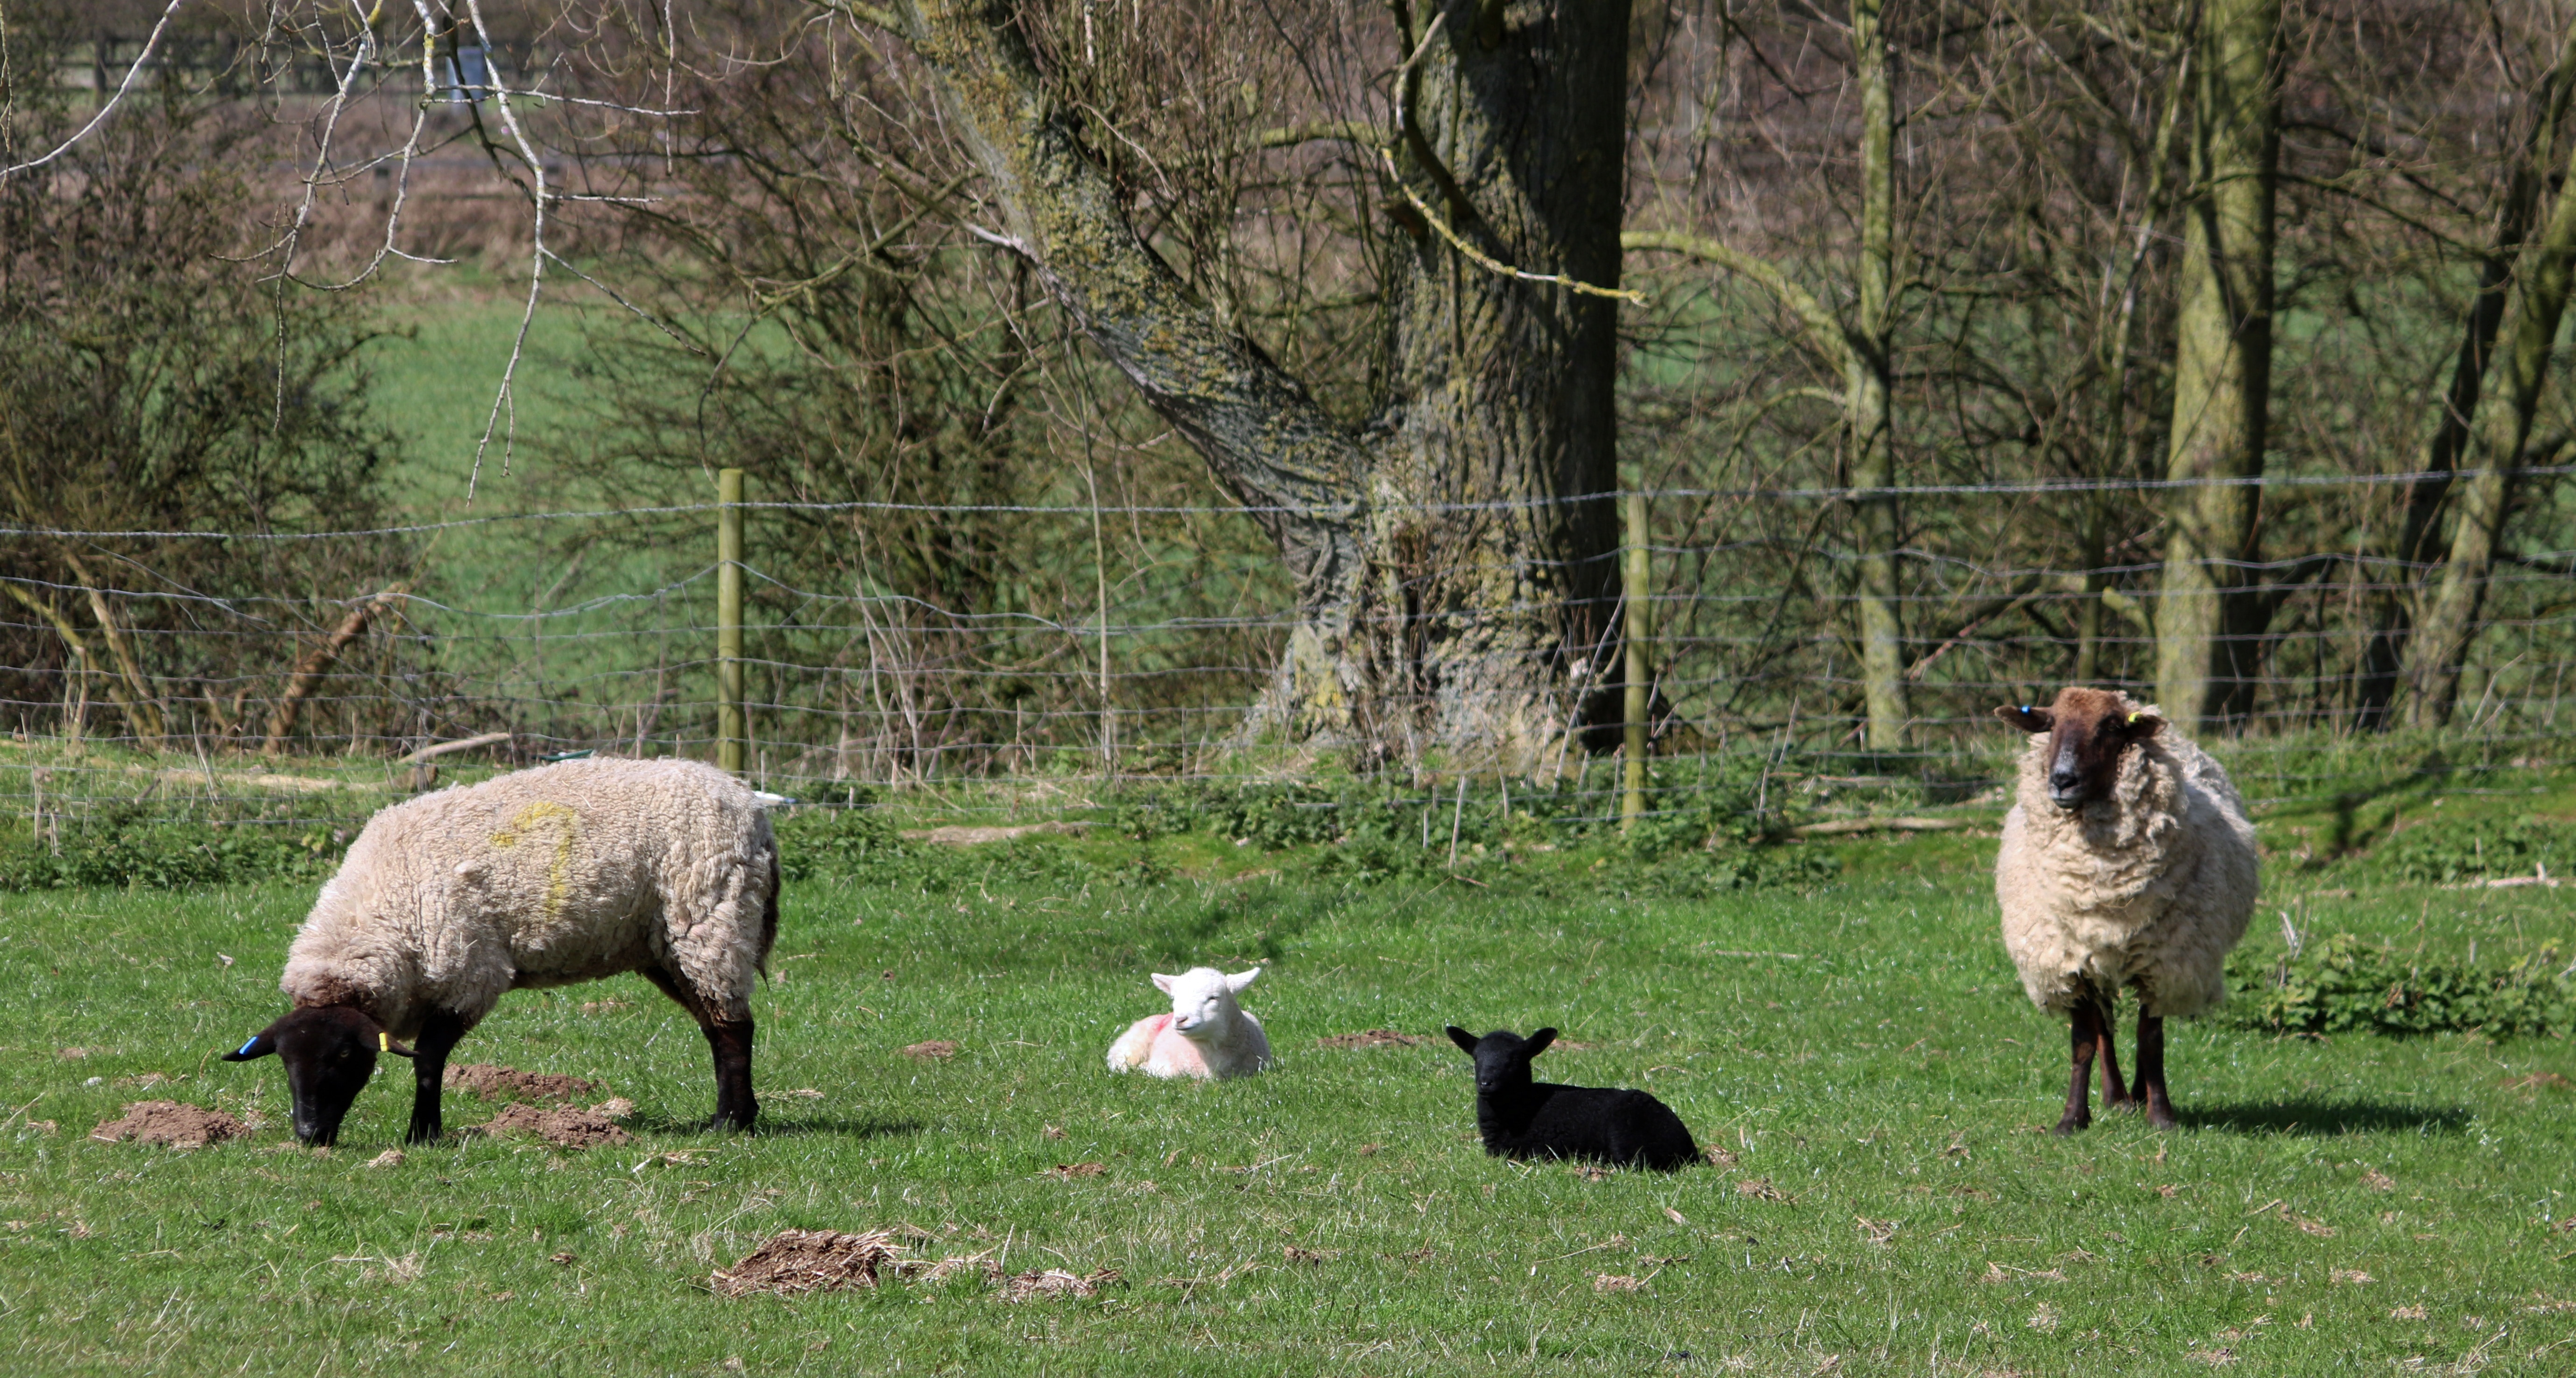 brown and white sheep on green grass field during daytime